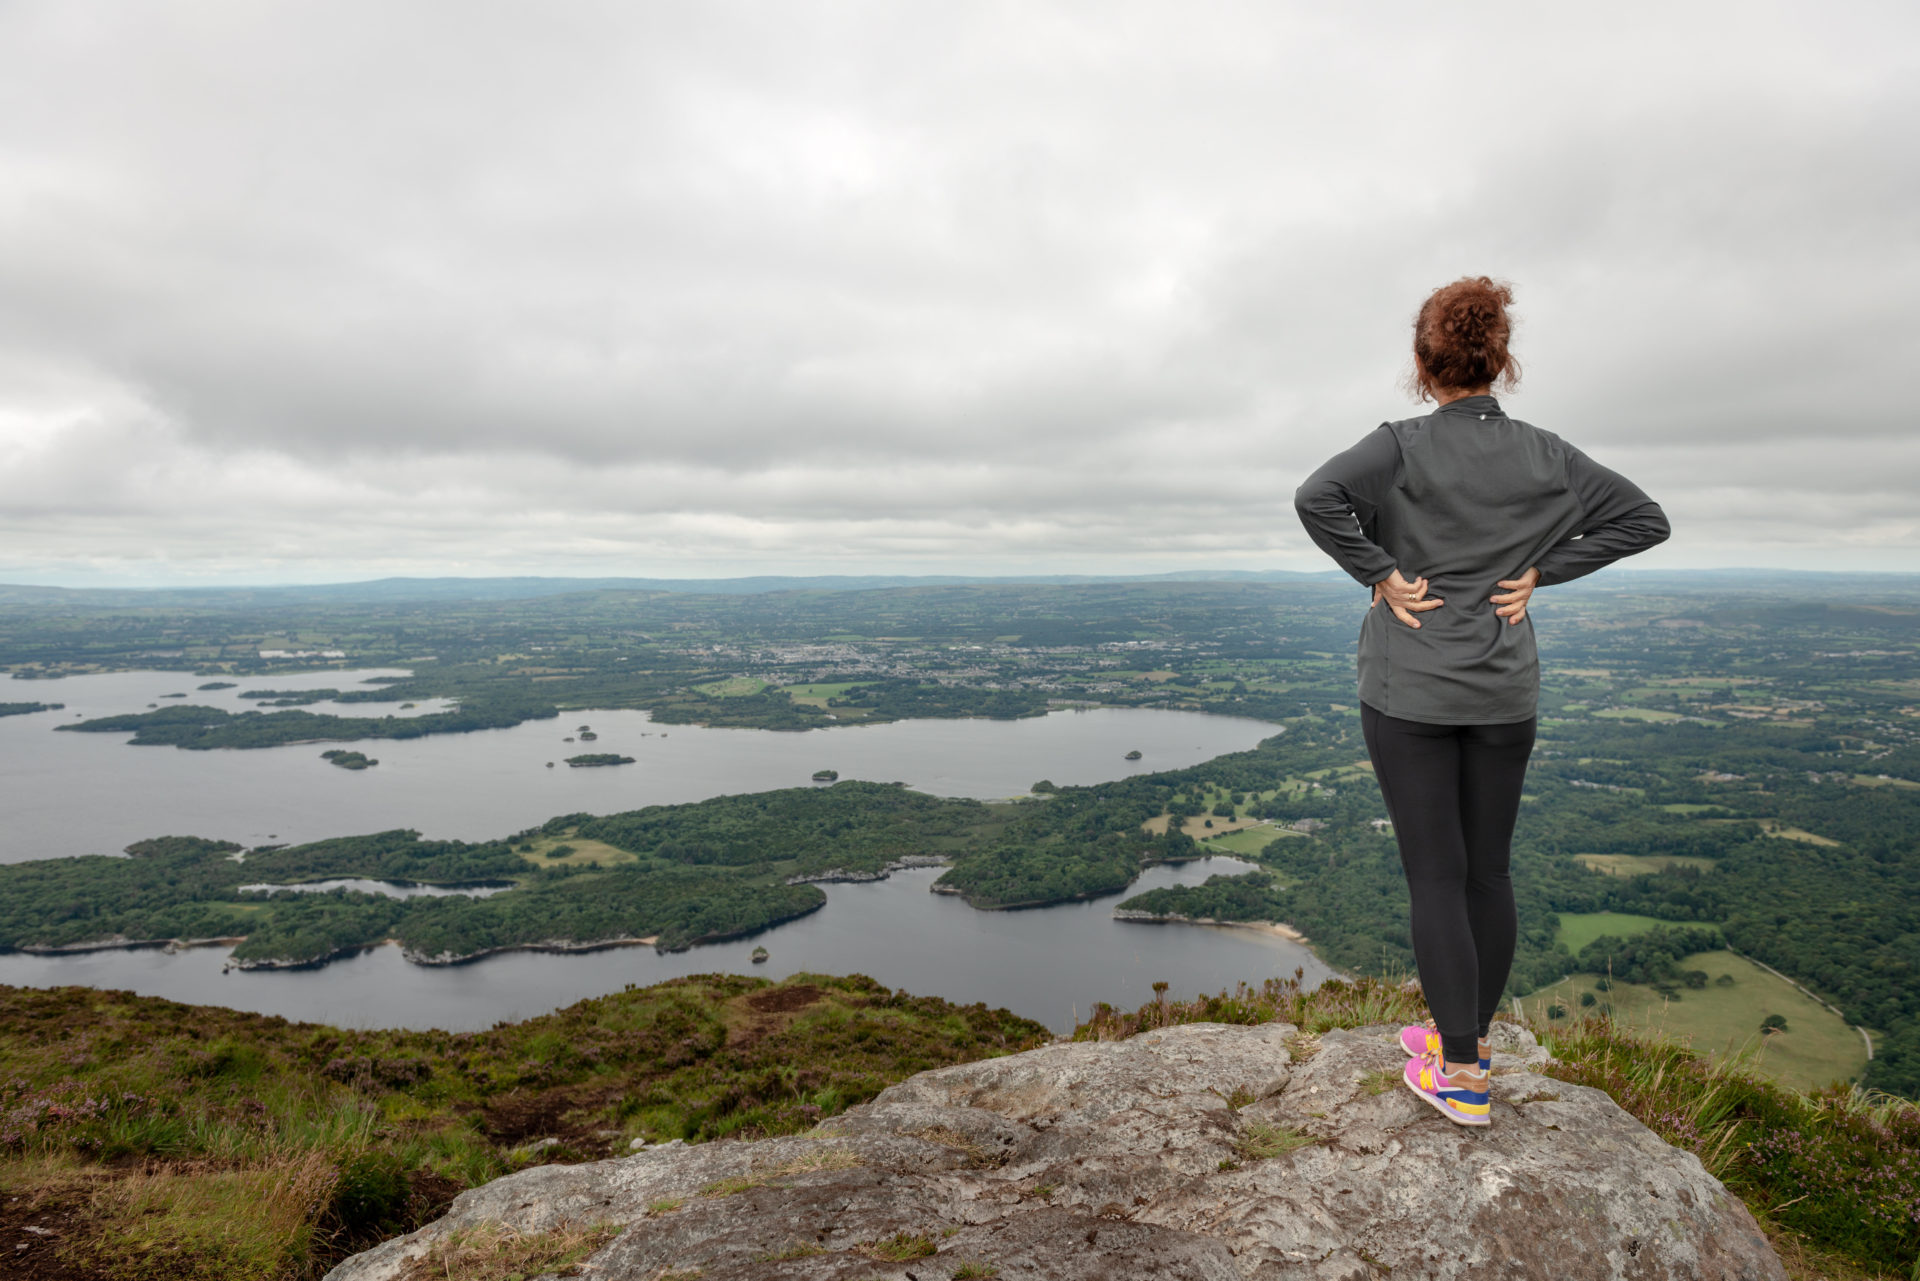 View to the Lakes of Killarney and Killarney Valley from Torc Mountain summit and a female hiker in Killarney National Park, County Kerry, Ireland